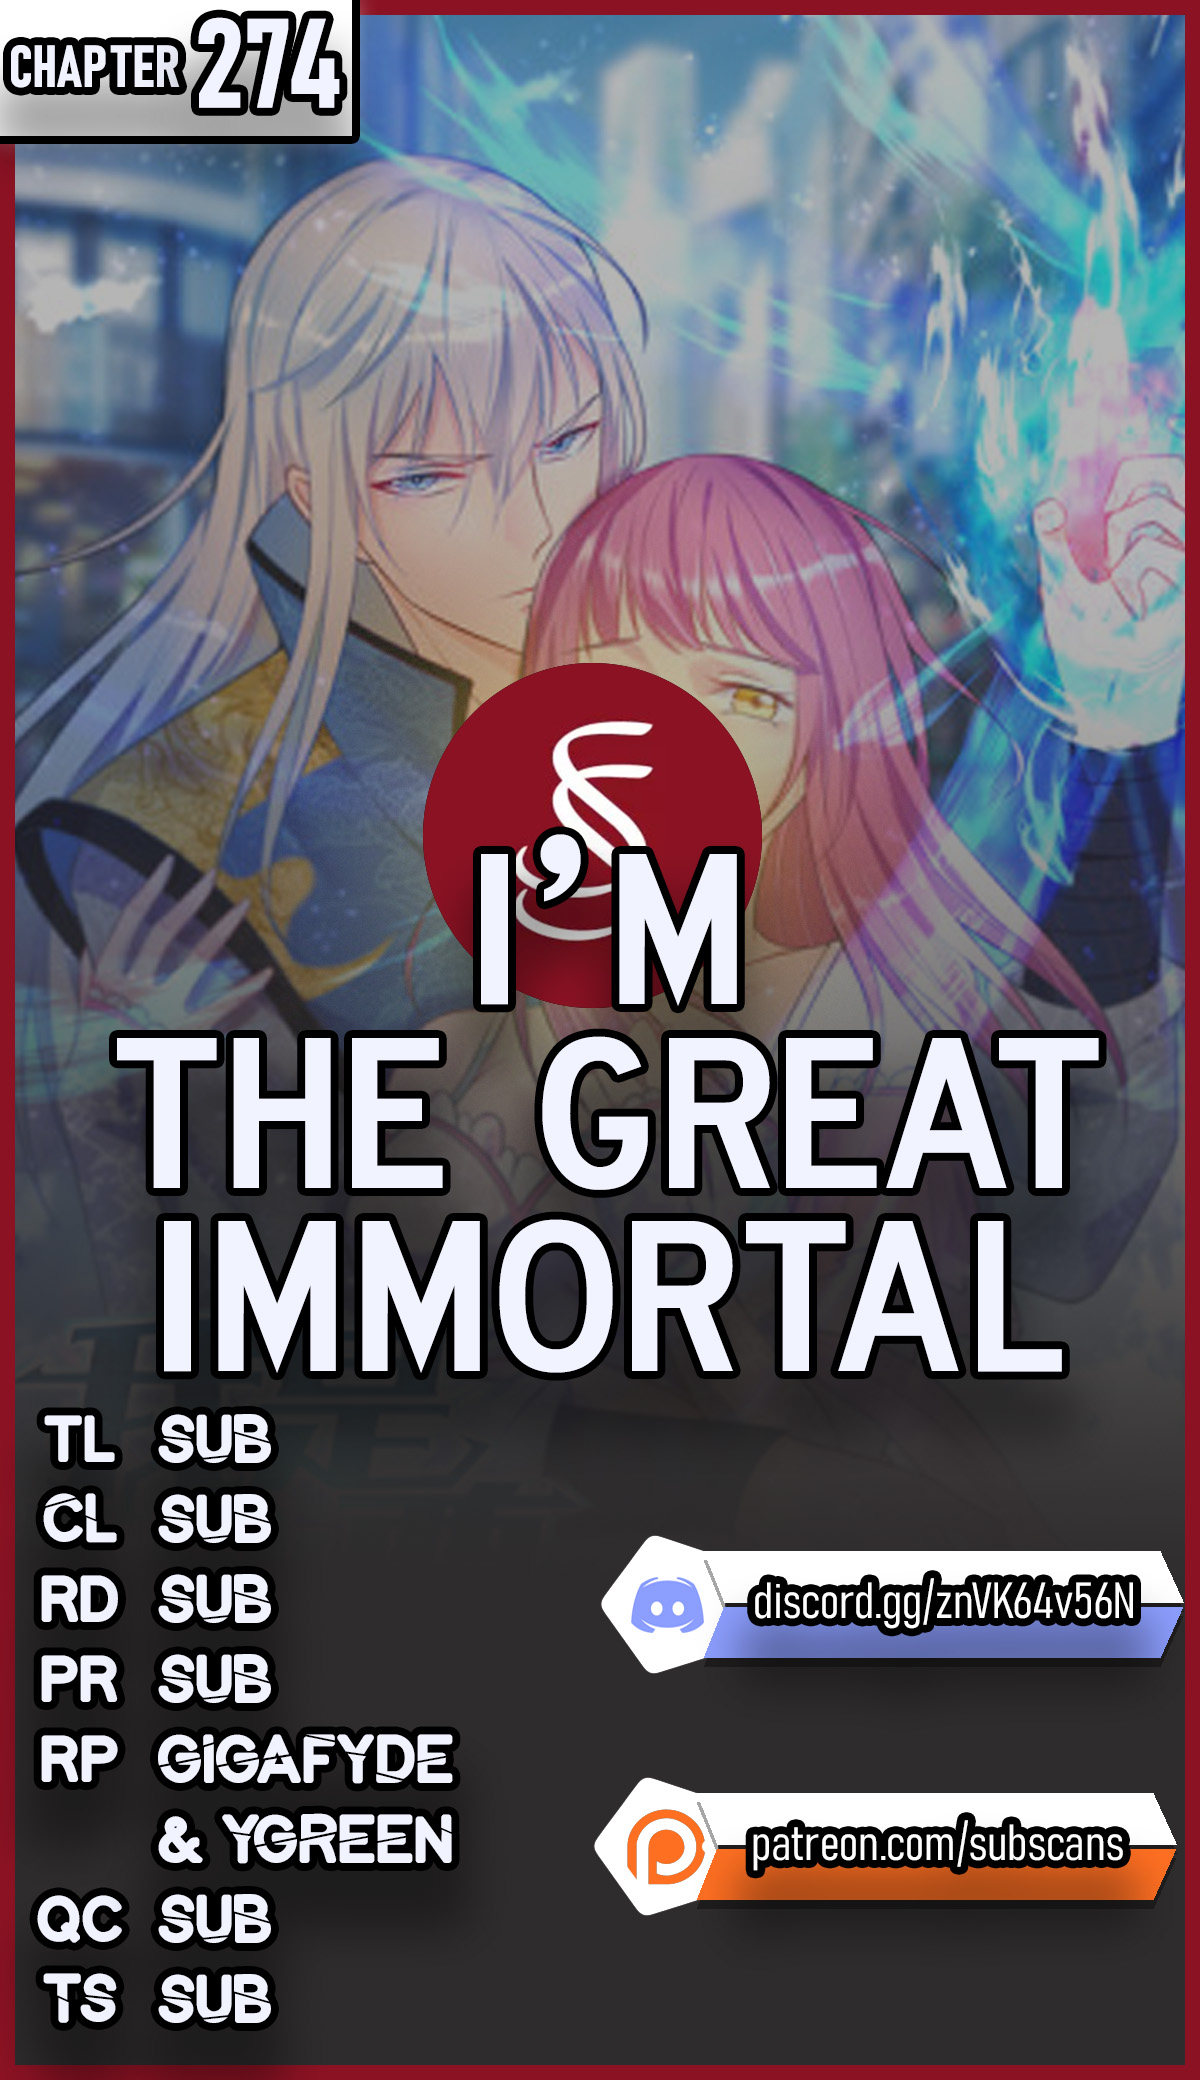 I'm the Great Immortal Ch. 274